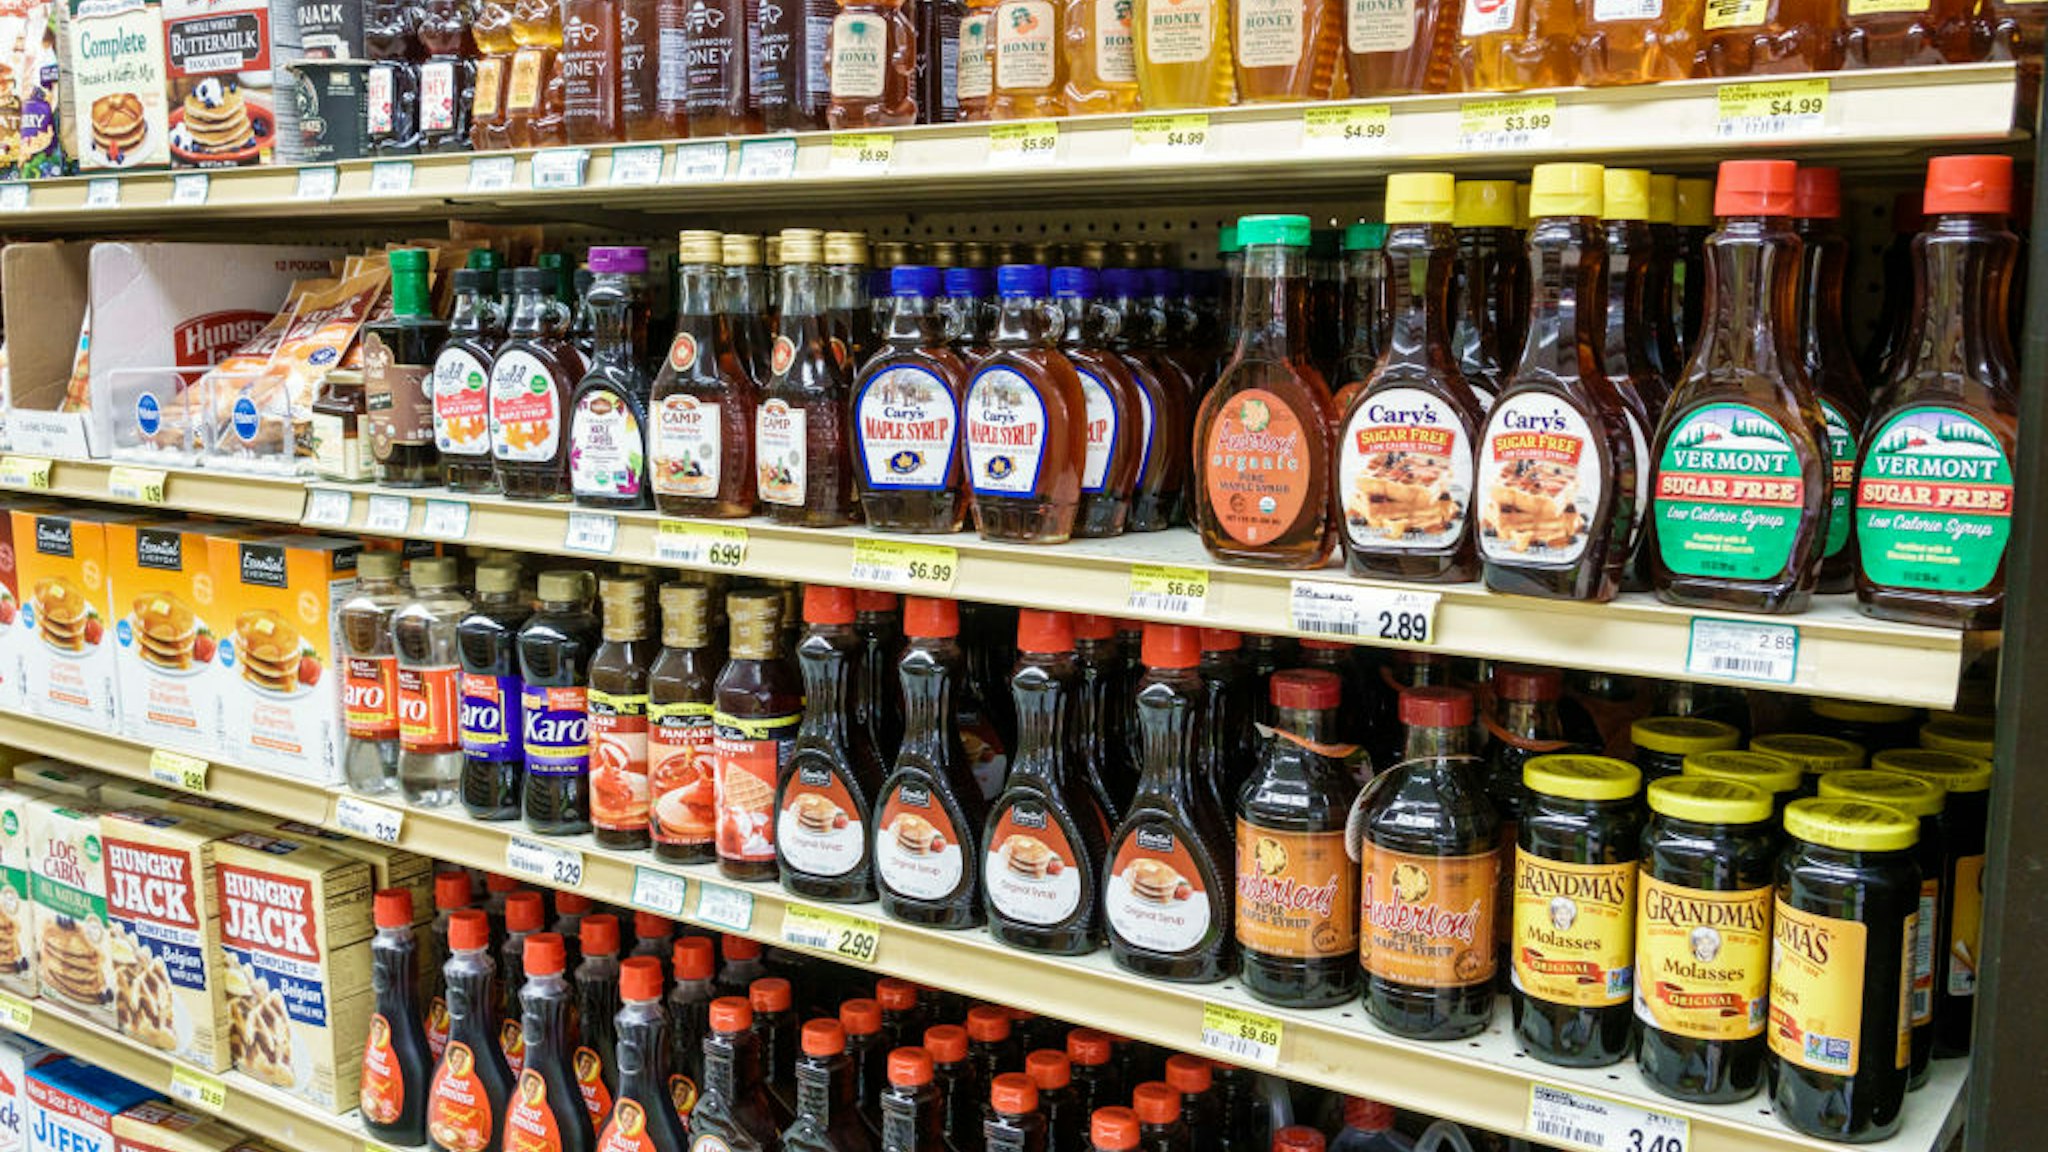 Sanibel Island, Jerry's Foods, grocery store, maple syrup aisle.